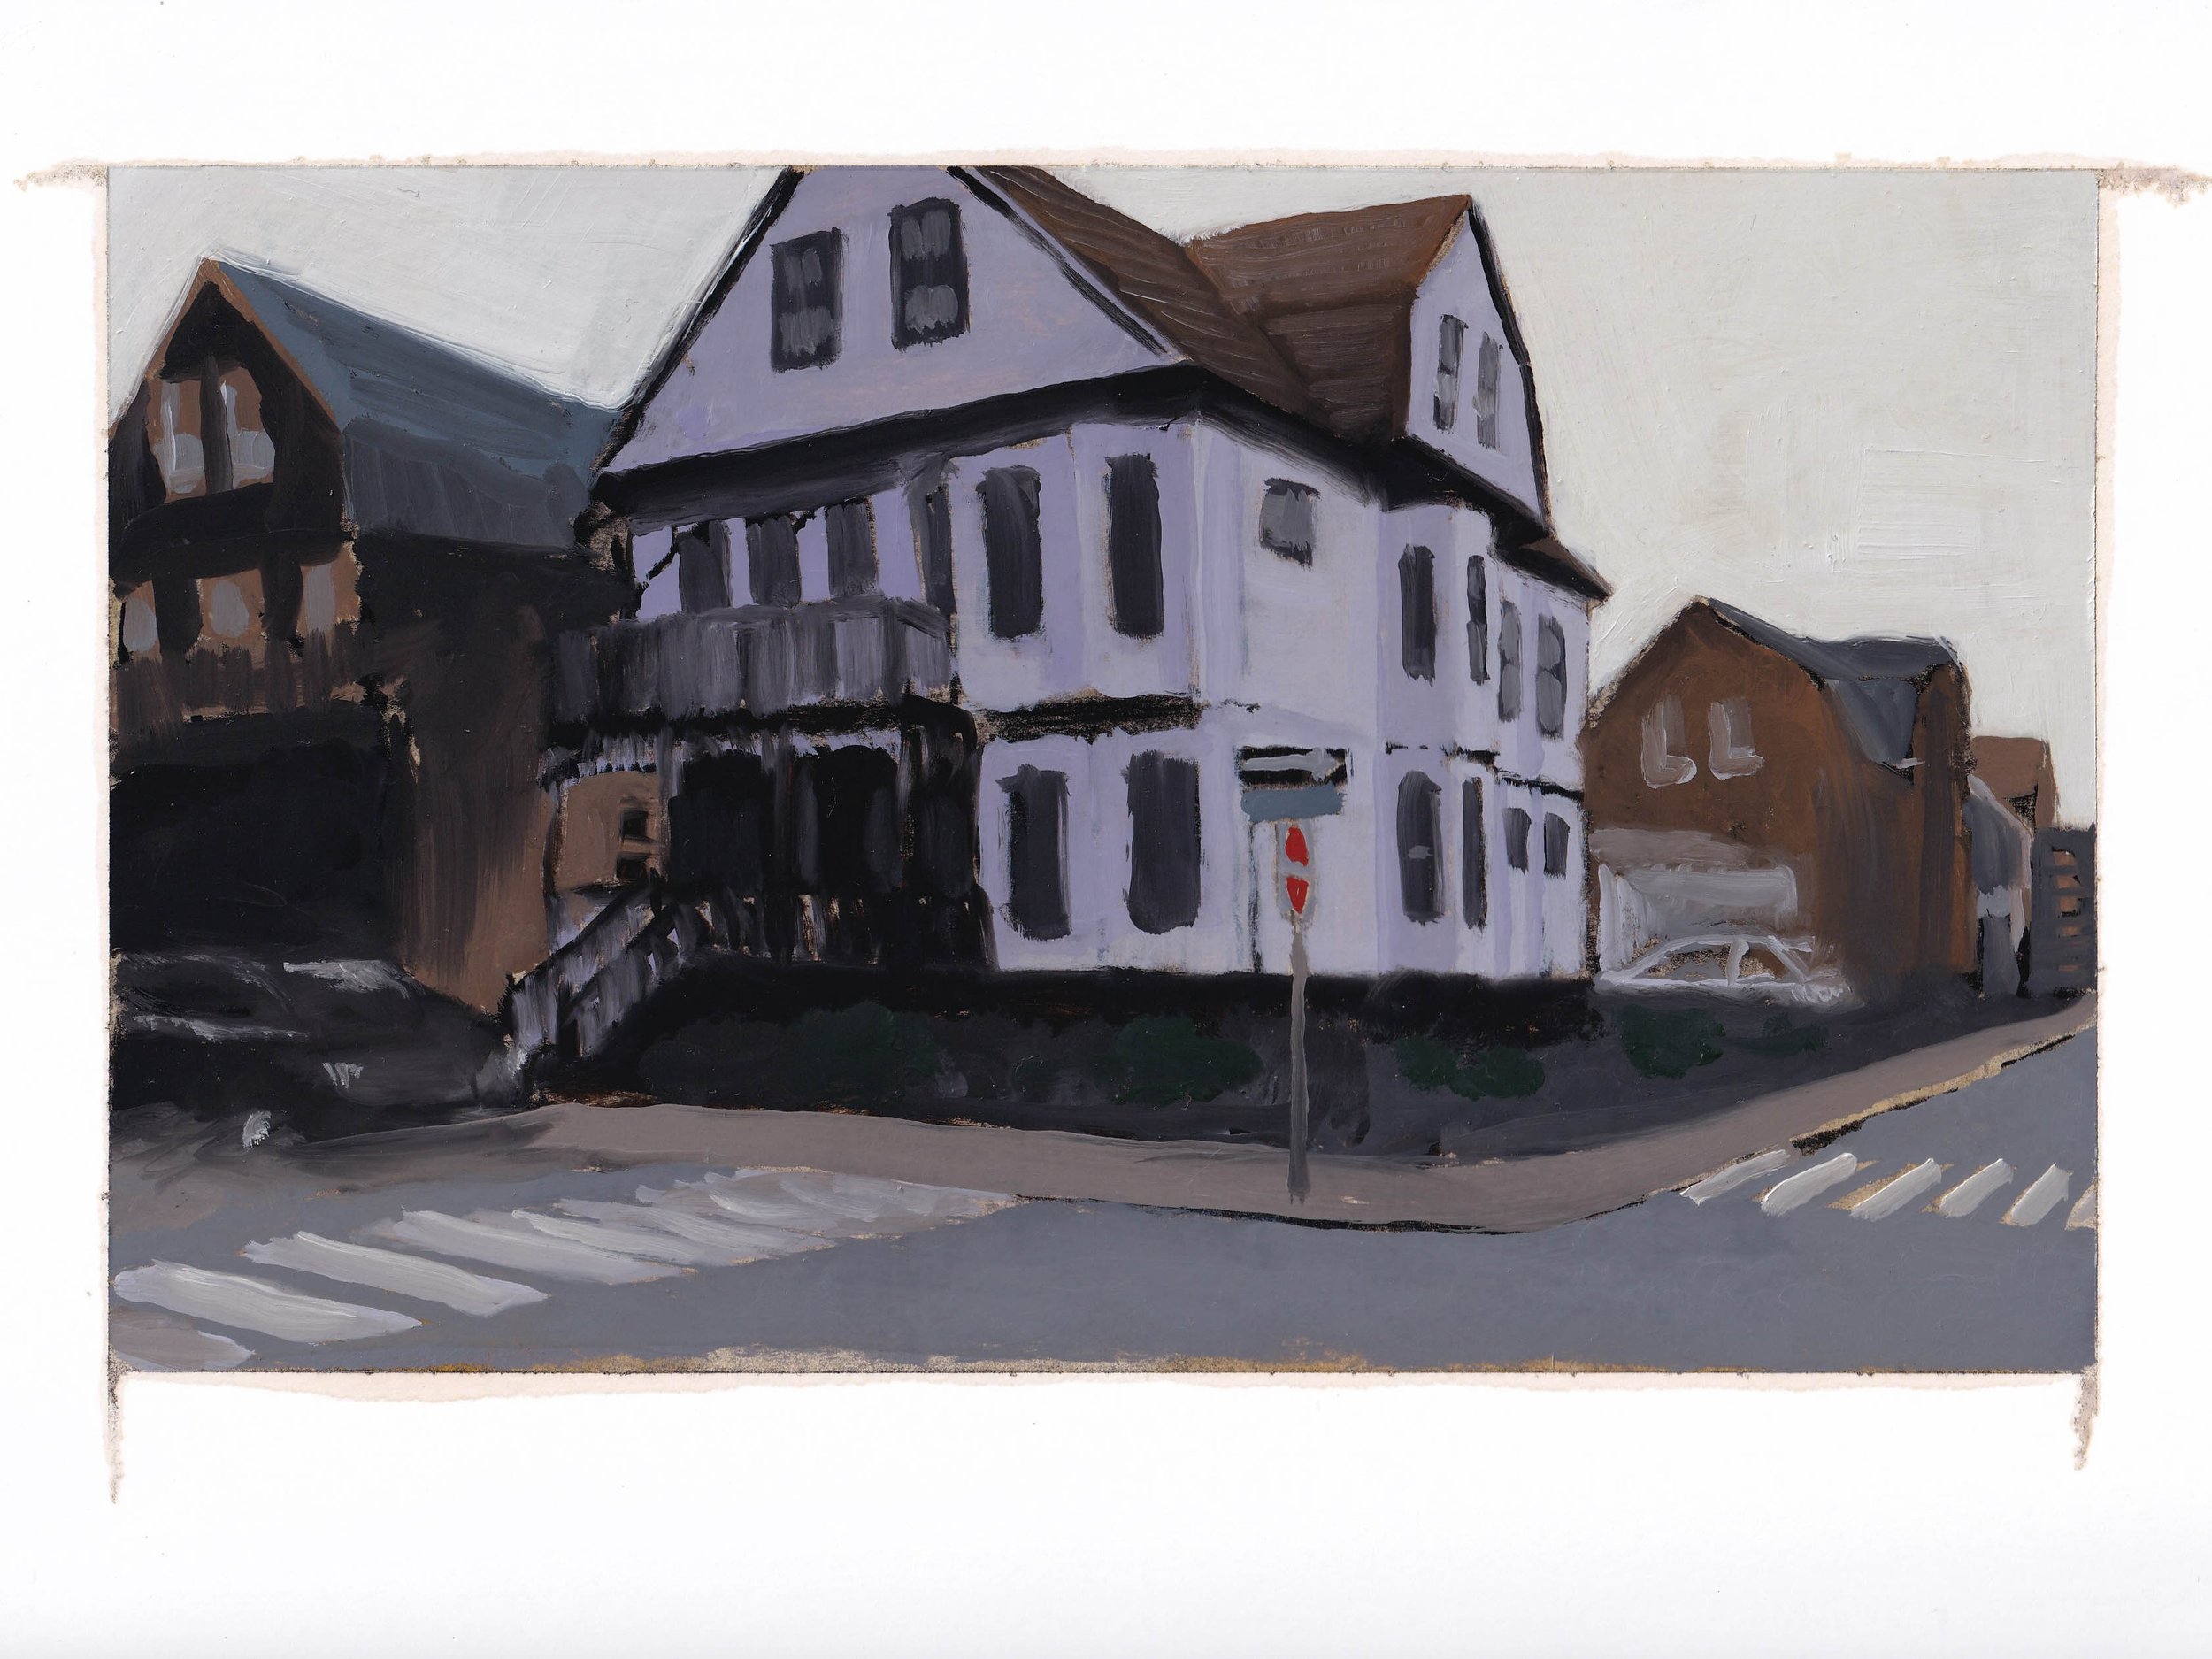  nilbog ave - 9” x 12” - 2022 - charcoal, amber shellac, and oil paint on paper 